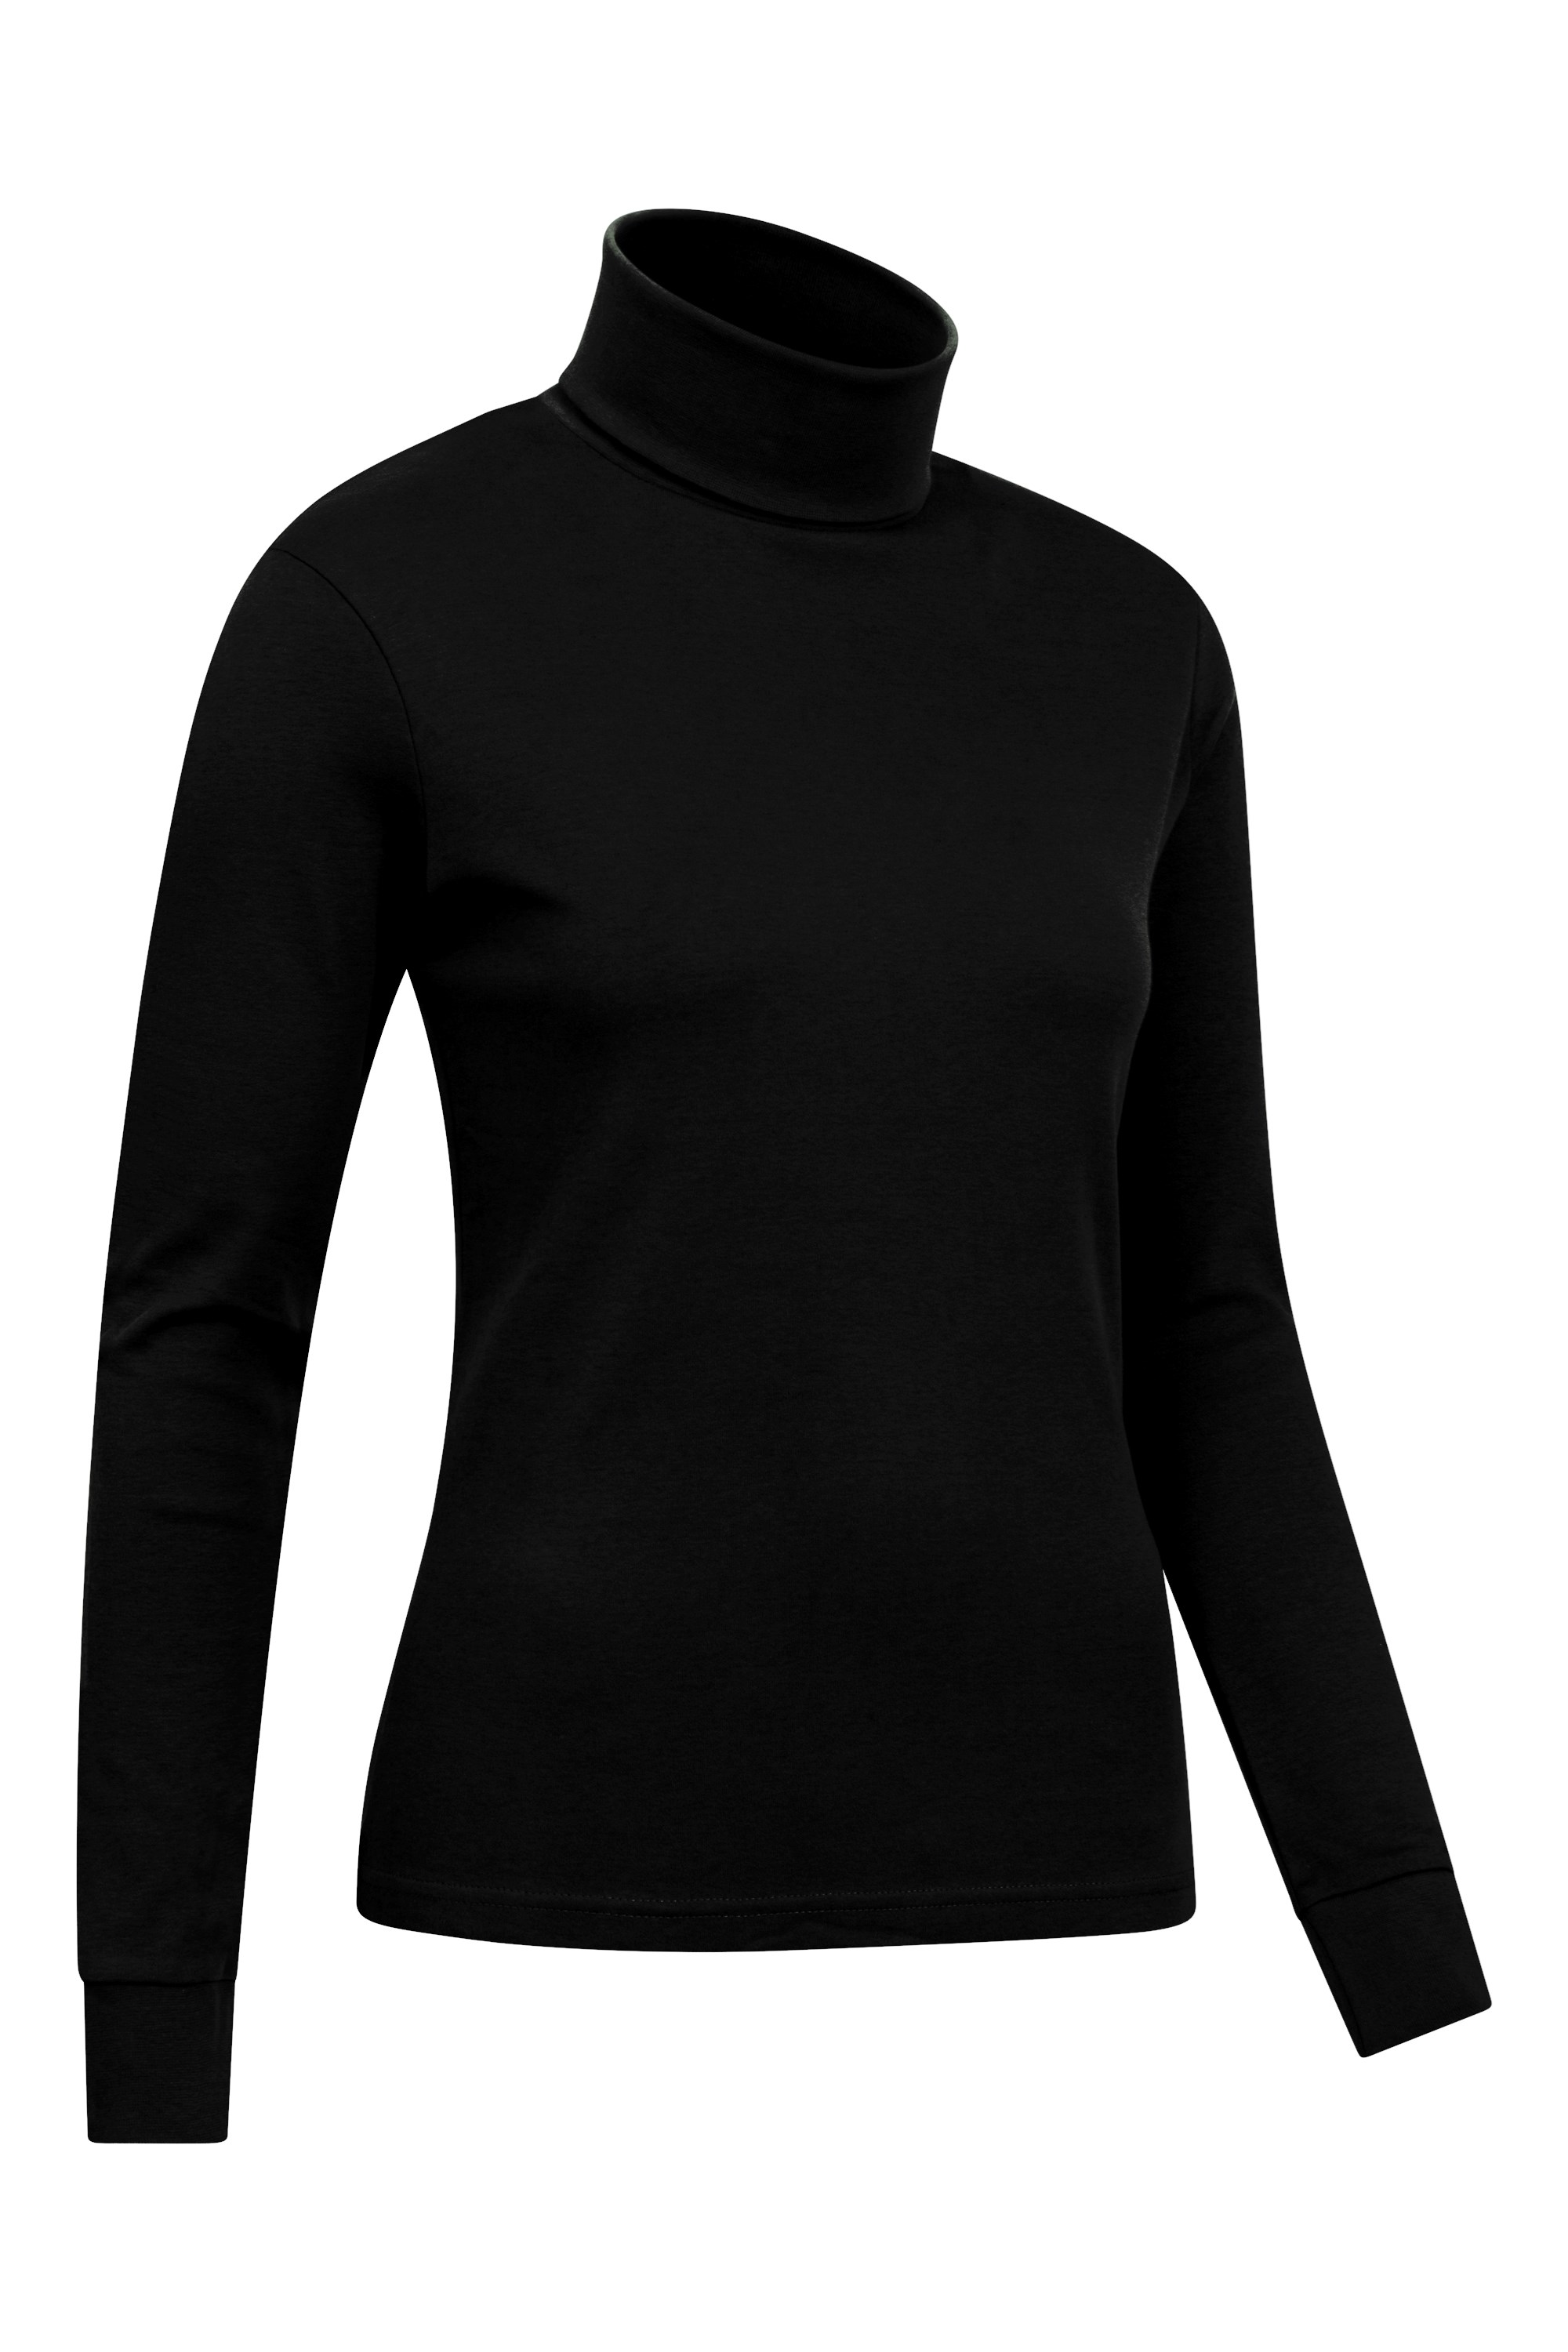 Buy Thermal Polo Neck Top Online in Oman from Matalan